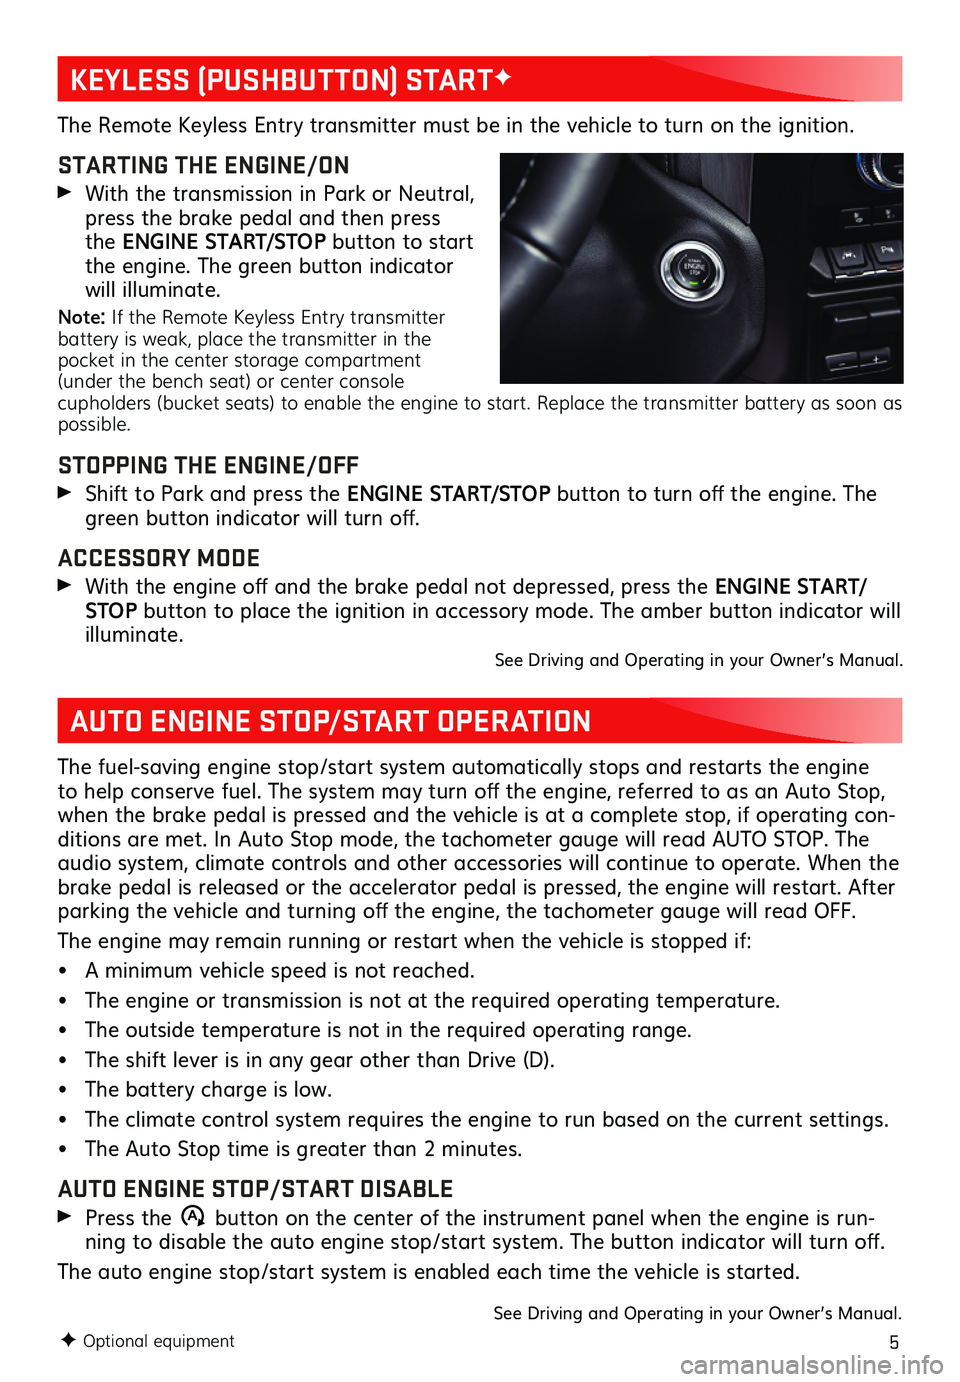 GMC SIERRA 2019  Get To Know Guide 5
The Remote Keyless Entry transmitter must be in the vehicle to turn on the ignition.
STARTING THE ENGINE/ON
 With the transmission in Park or Neutral, press the brake pedal and then press the ENGINE